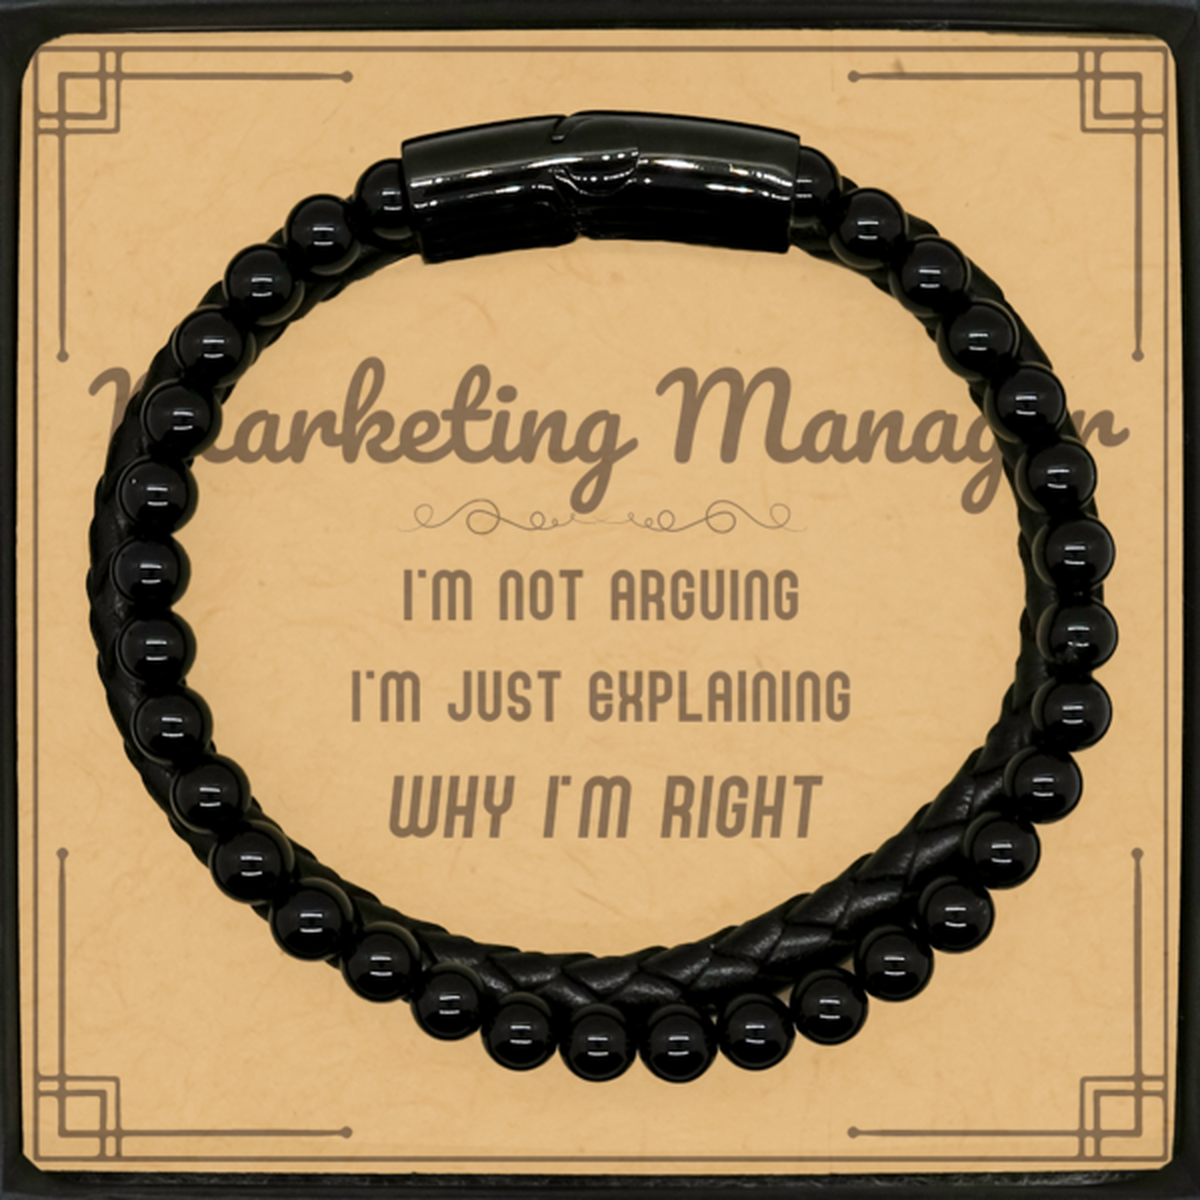 Marketing Manager I'm not Arguing. I'm Just Explaining Why I'm RIGHT Stone Leather Bracelets, Funny Saying Quote Marketing Manager Gifts For Marketing Manager Message Card Graduation Birthday Christmas Gifts for Men Women Coworker